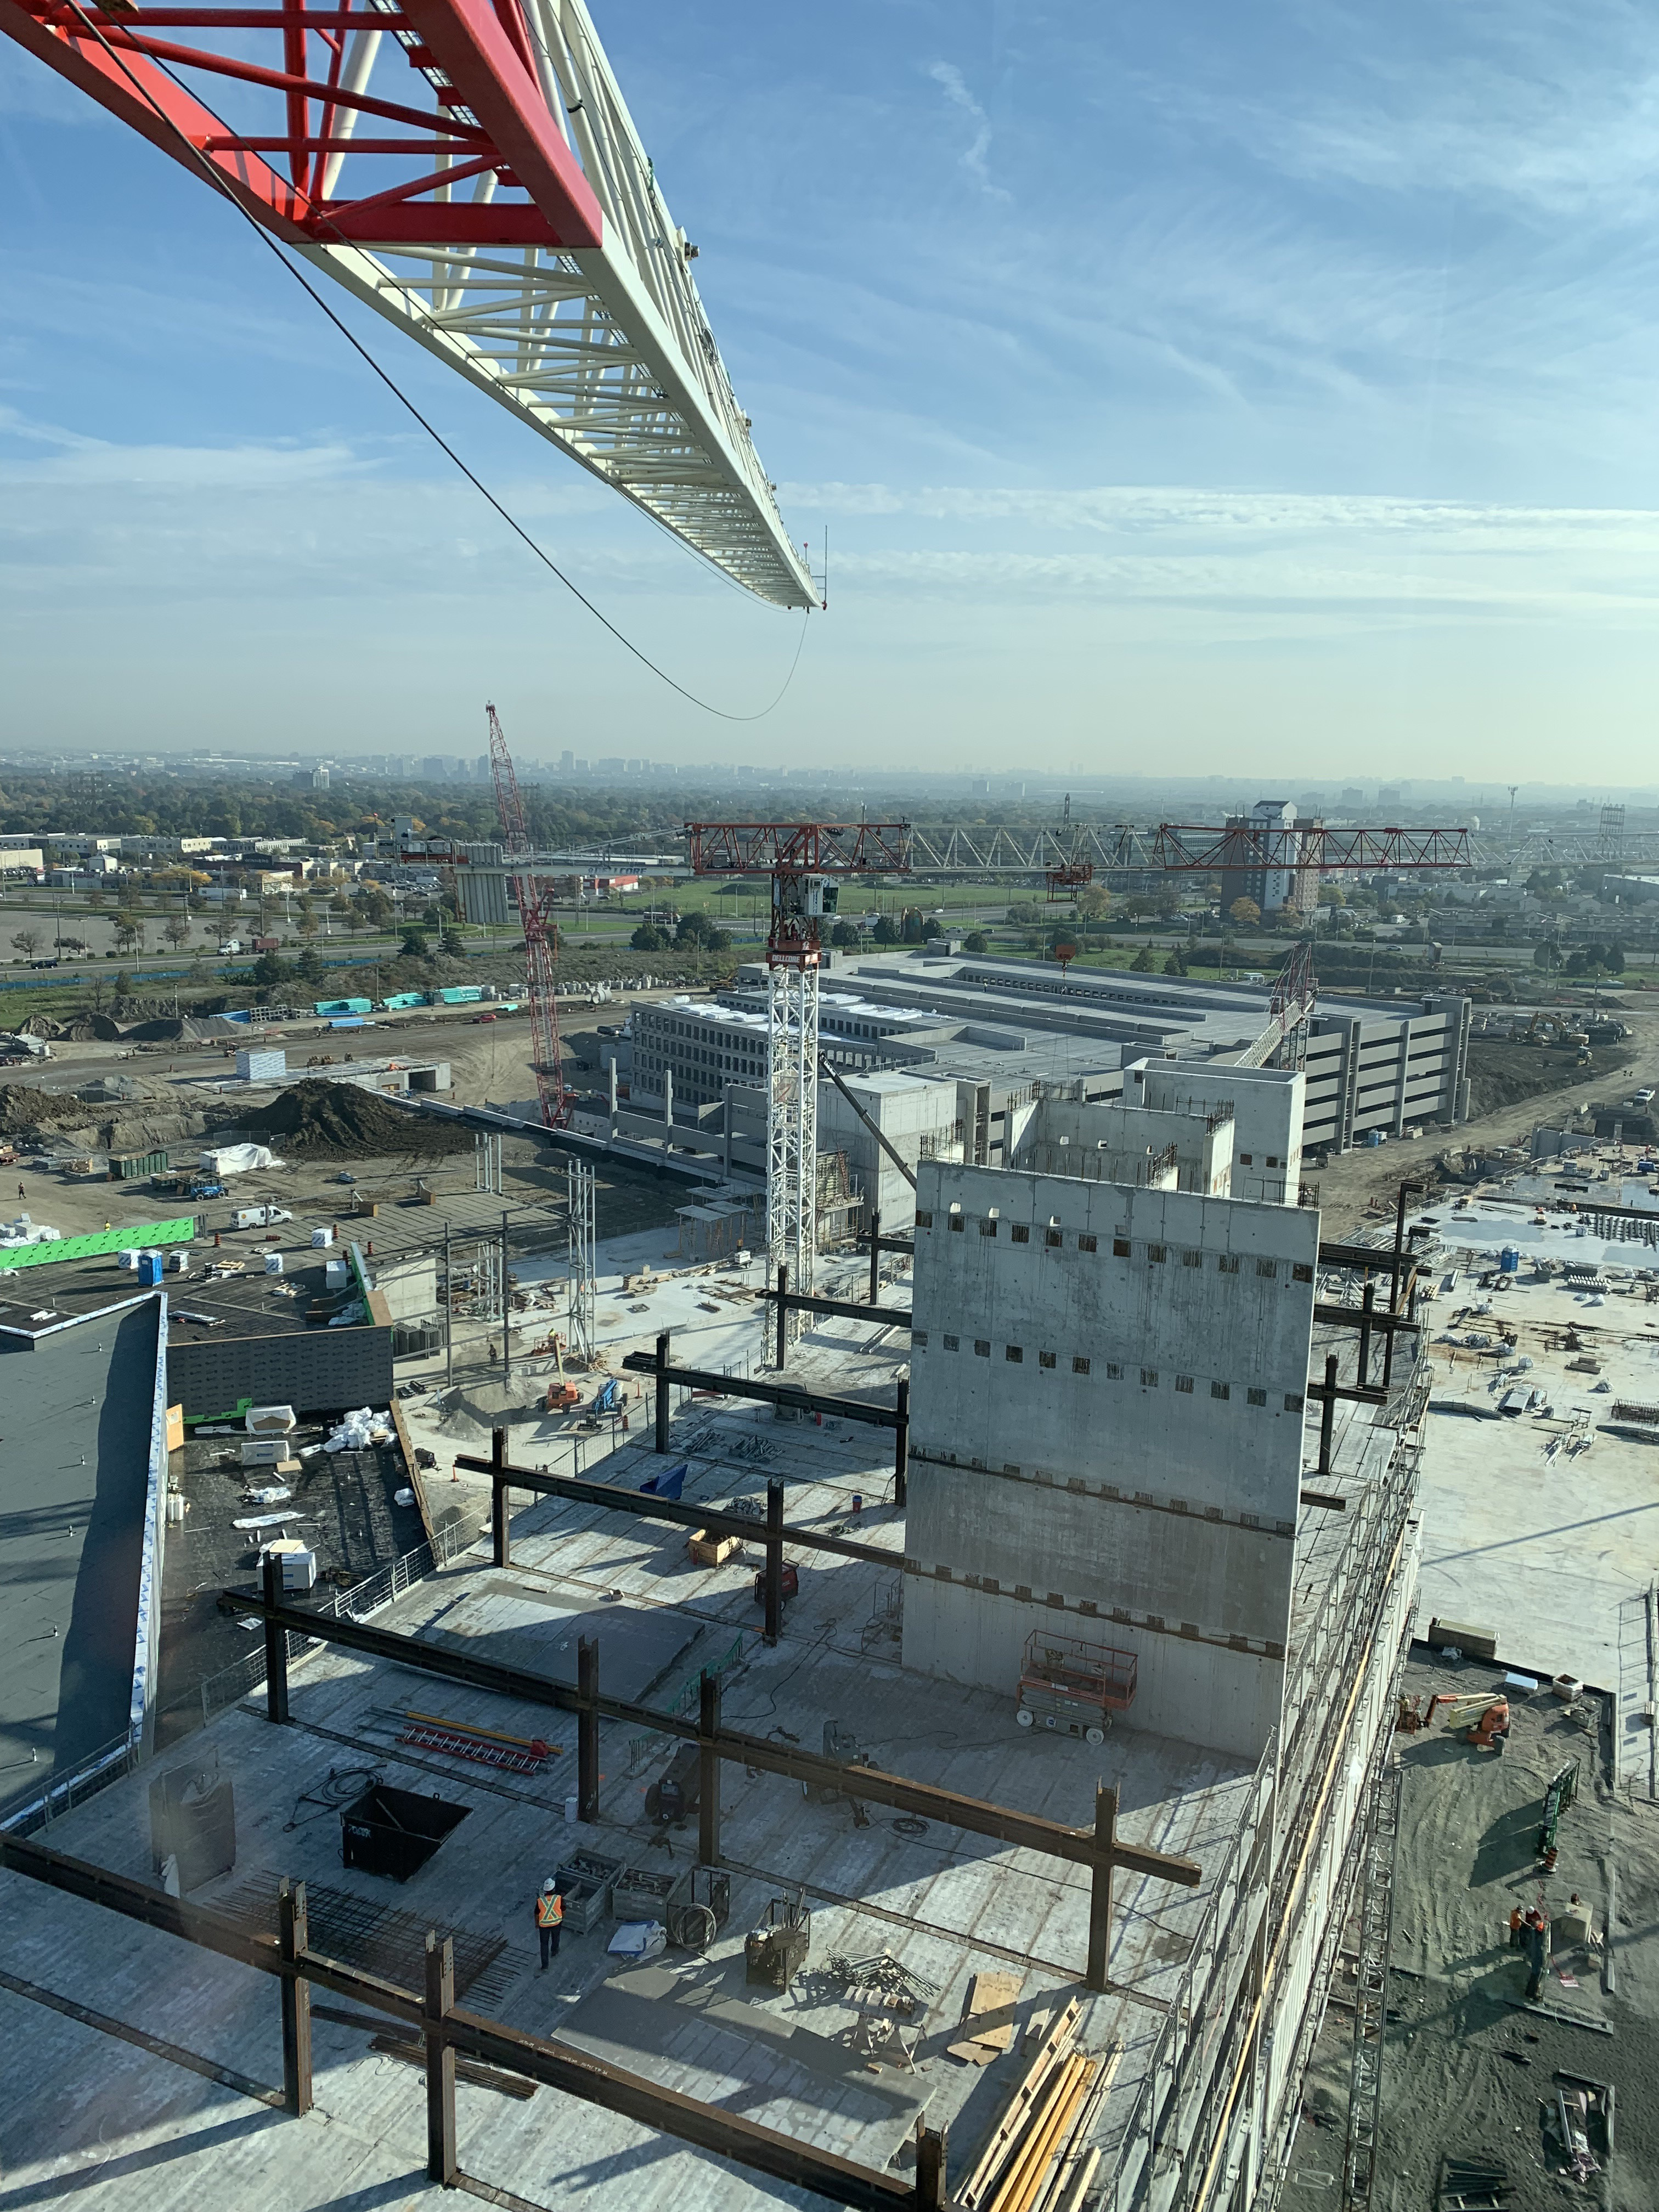 Local 793 member Andrew Rombough's view from his Comedil 332 tower crane.